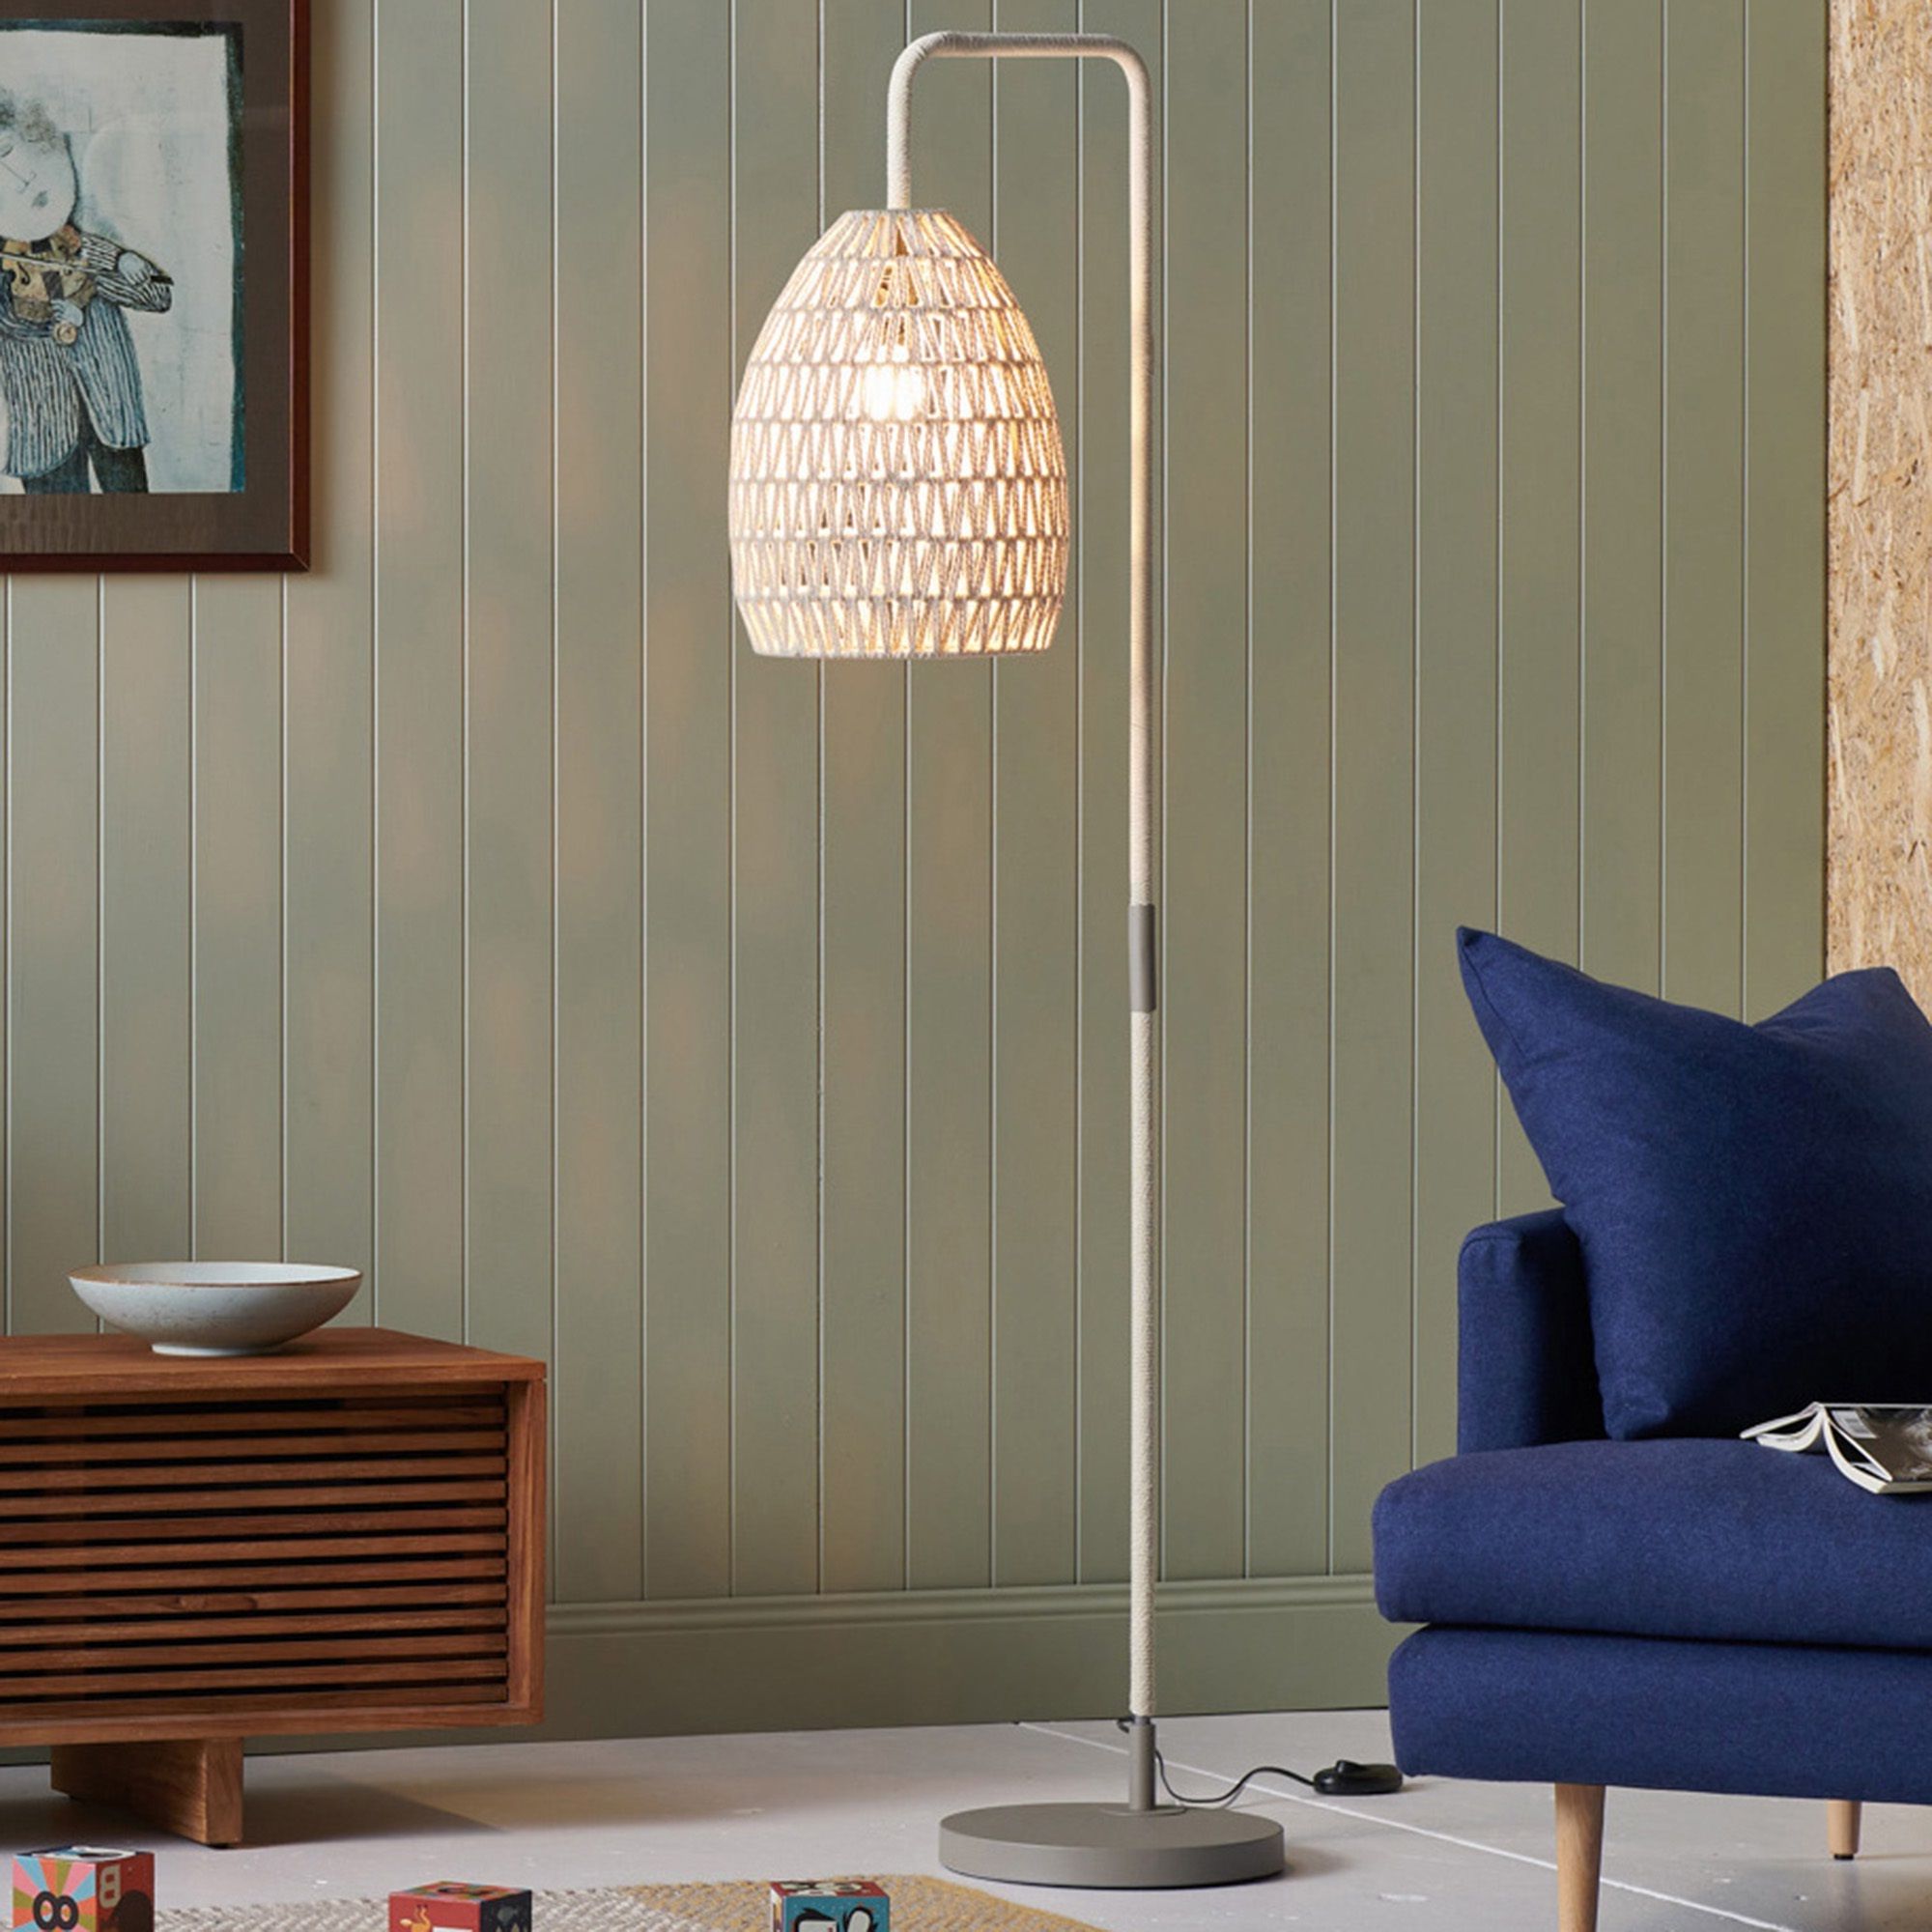 Temple & Webster Throughout Natural Woven Floor Lamps (View 5 of 15)